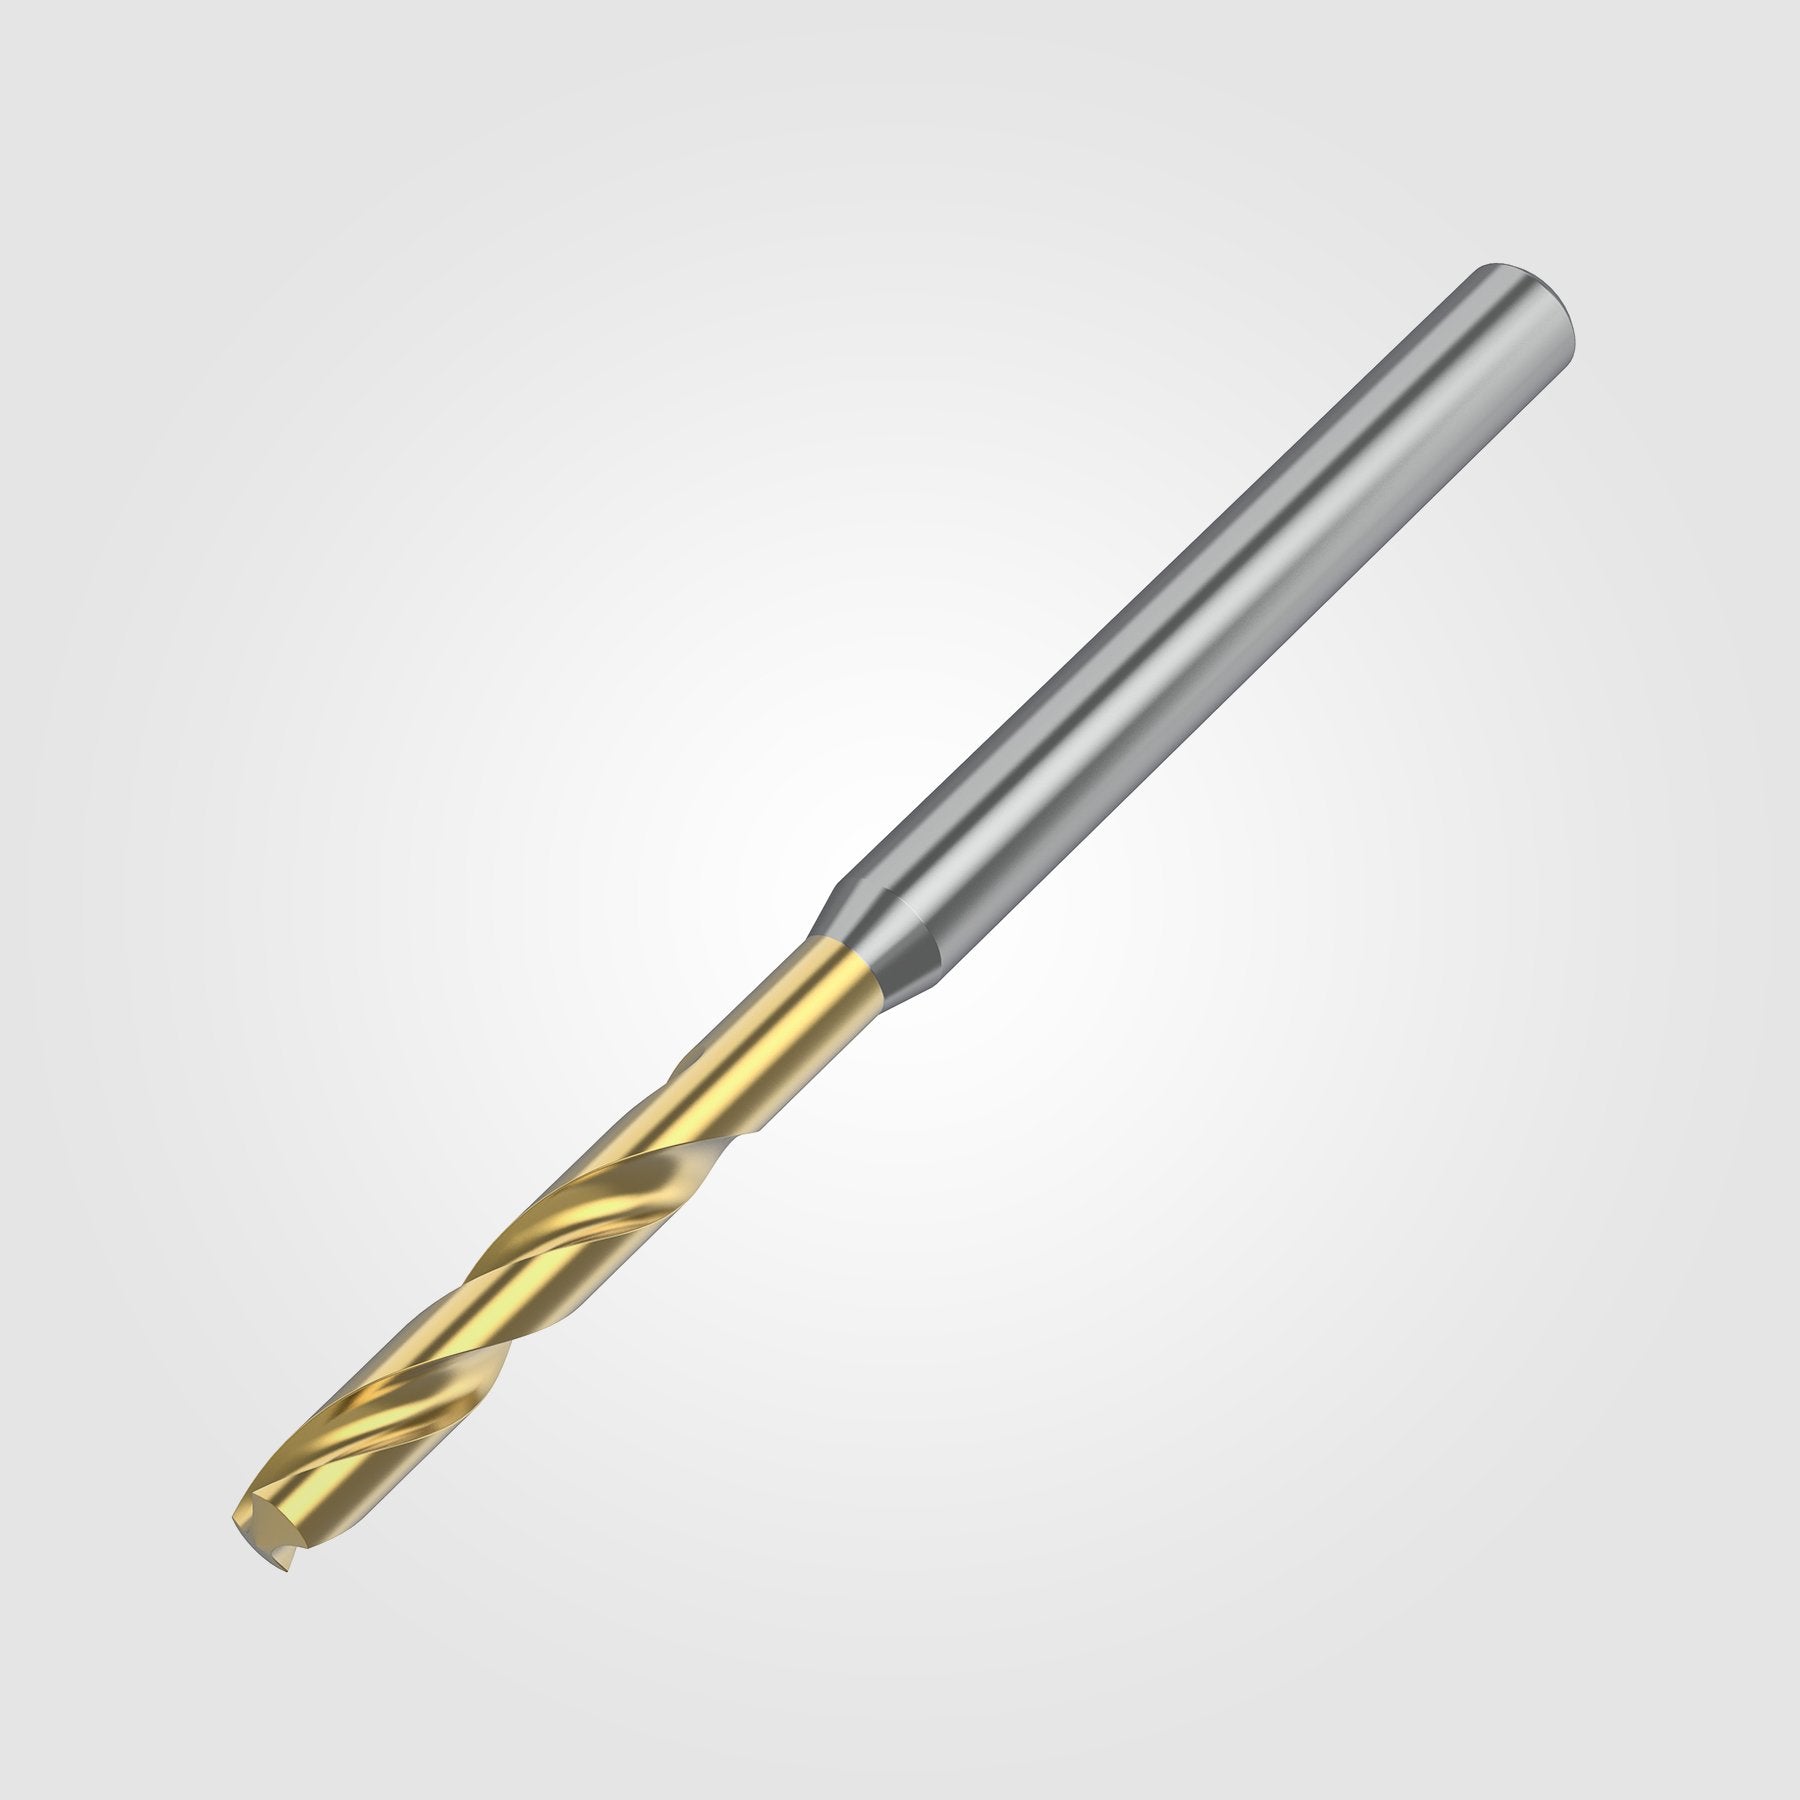 GOdrill (THROUGH COOLANT) | 15.479mm / .6094" / 5xD | SOLID CARBIDE DRILL | 4149356